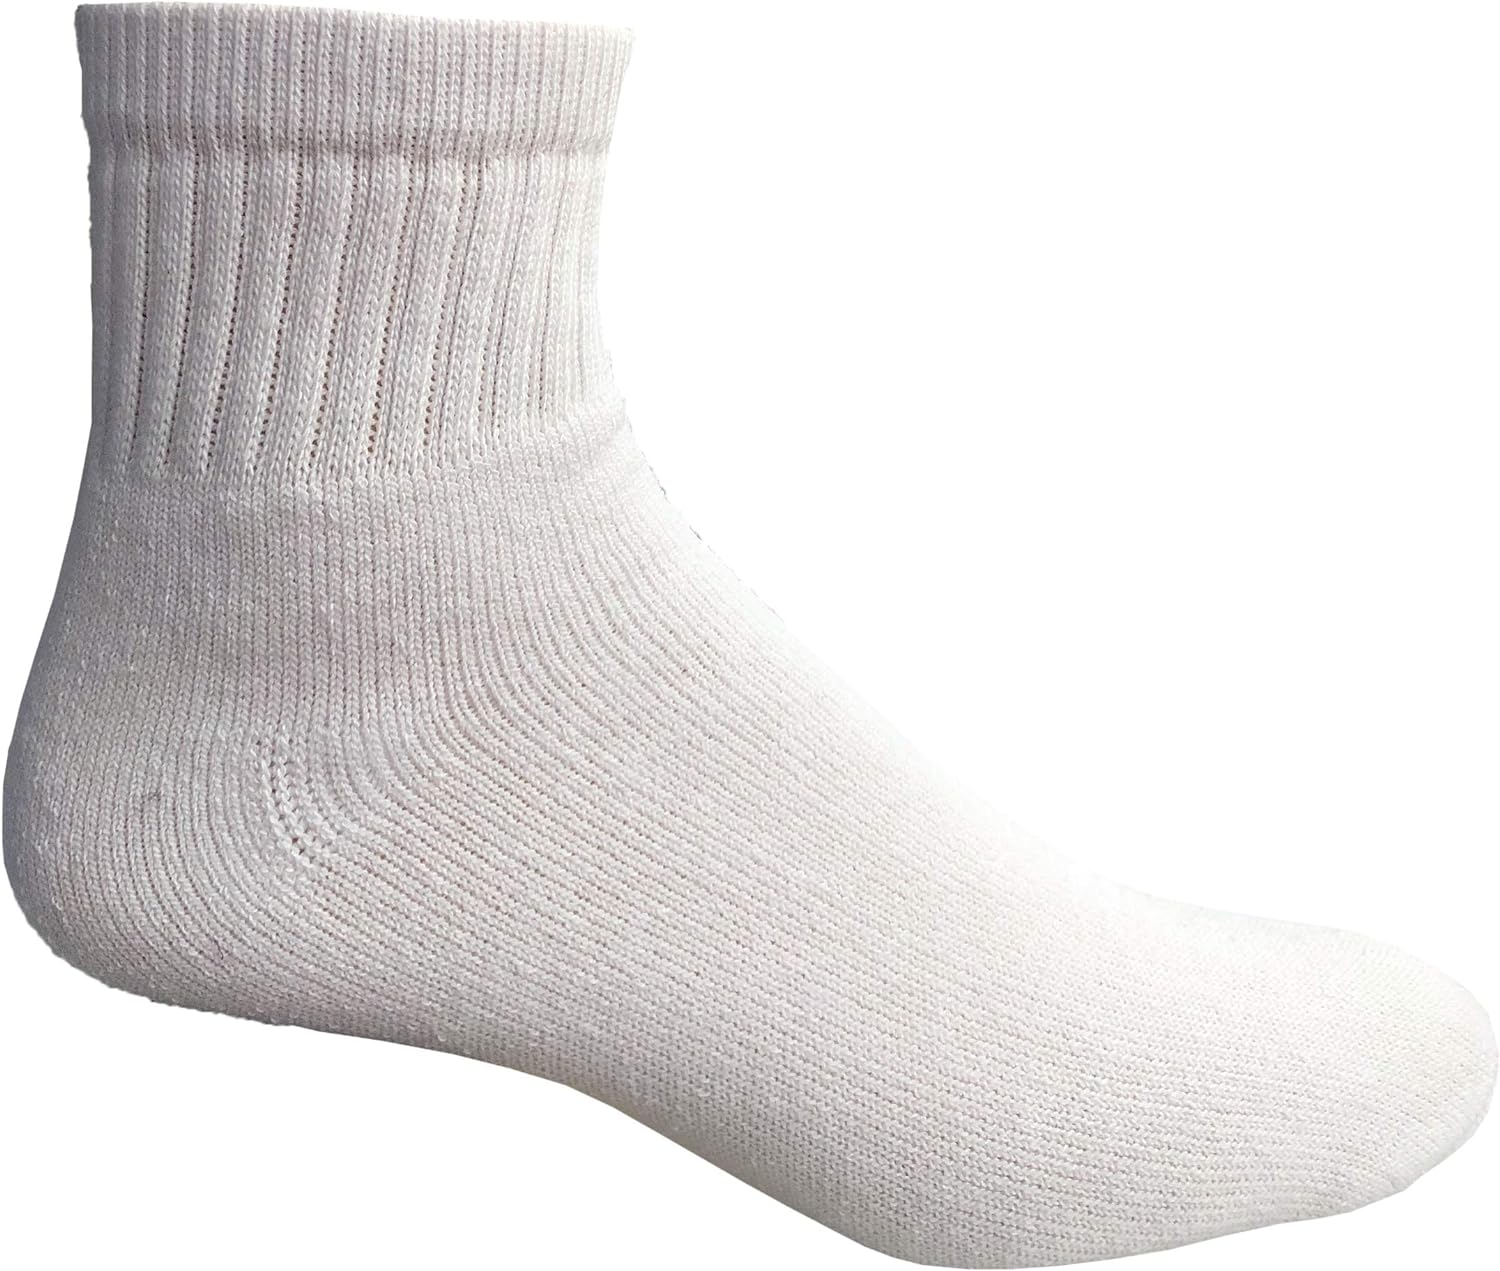 Yacht & Smith Bulk Thick Cotton Socks Men, Womans or Kids Crew Cut, Ankle Socks - 72 Pairs (Solid White, Womens 9-11)